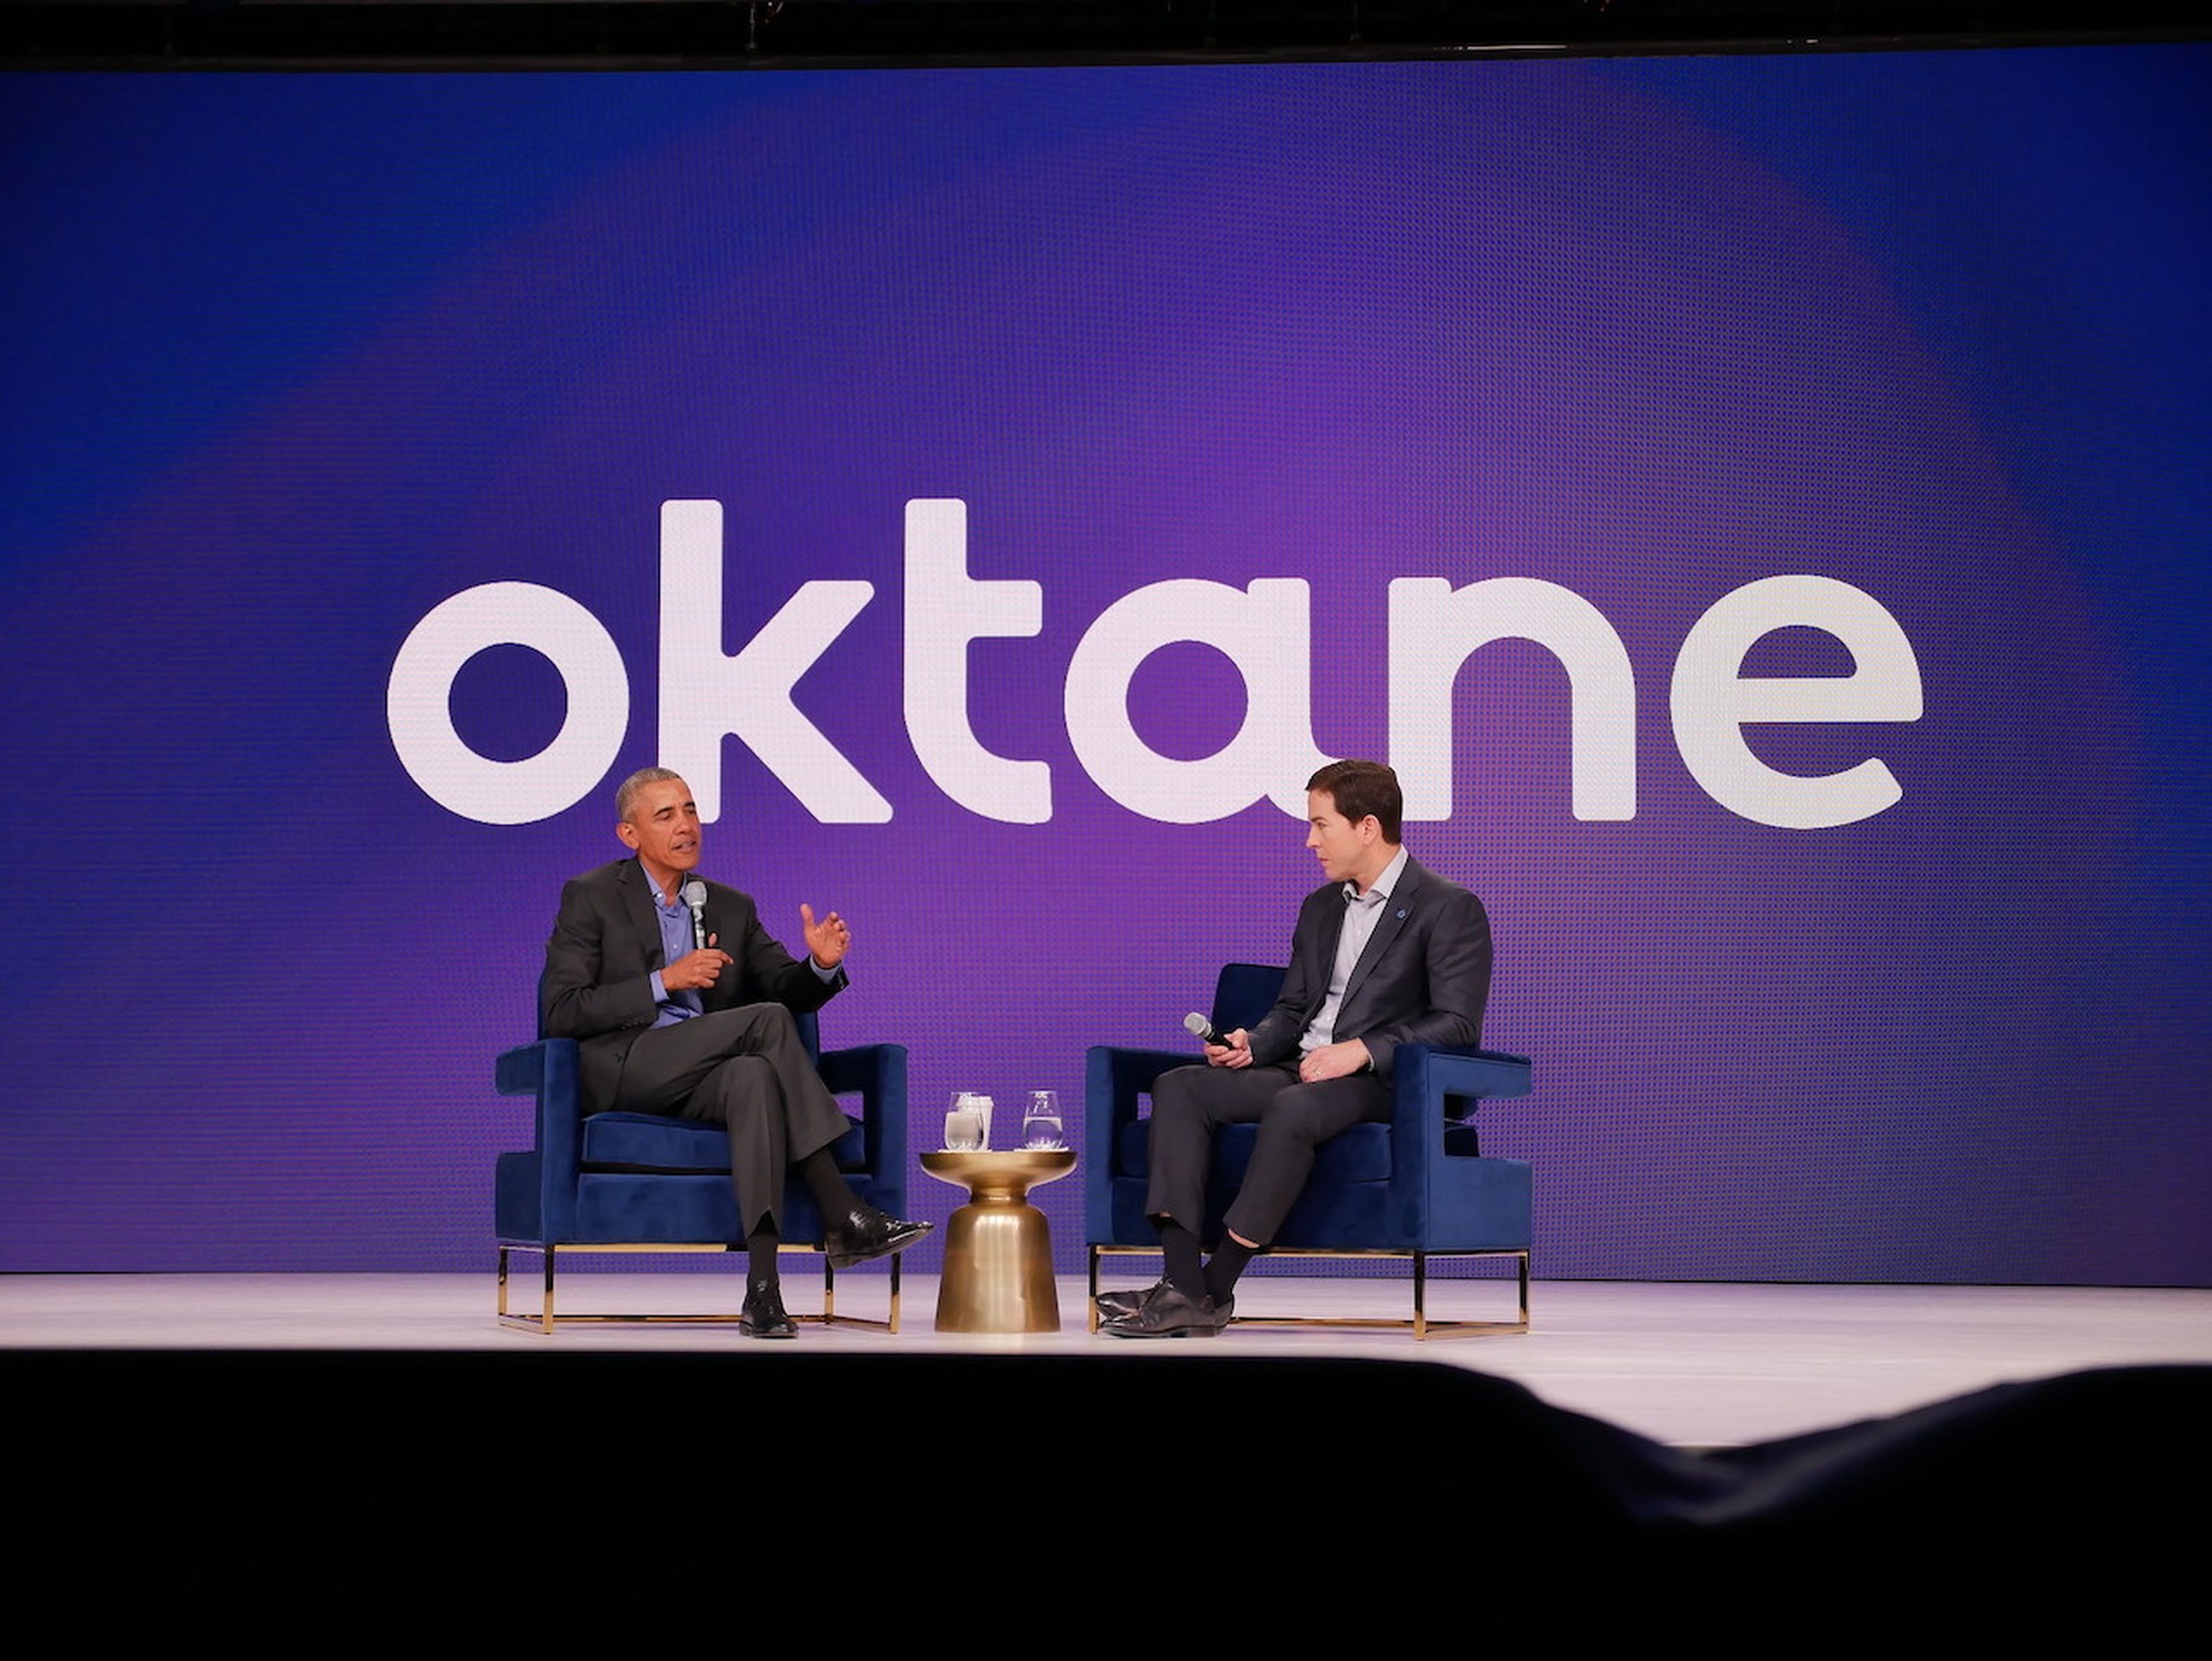 Today’s columnist, Tarun Desikan of Banyan Security, writes that the Okta incident could have happened to any SaaS provider. (&#8220;President Barack Obama Keynote at Oktane18&#8221; by aaronparecki is marked with CC BY 2.0. To view the terms, visit https://creativecommons.org/licenses/by/2.0/?ref=openverse)